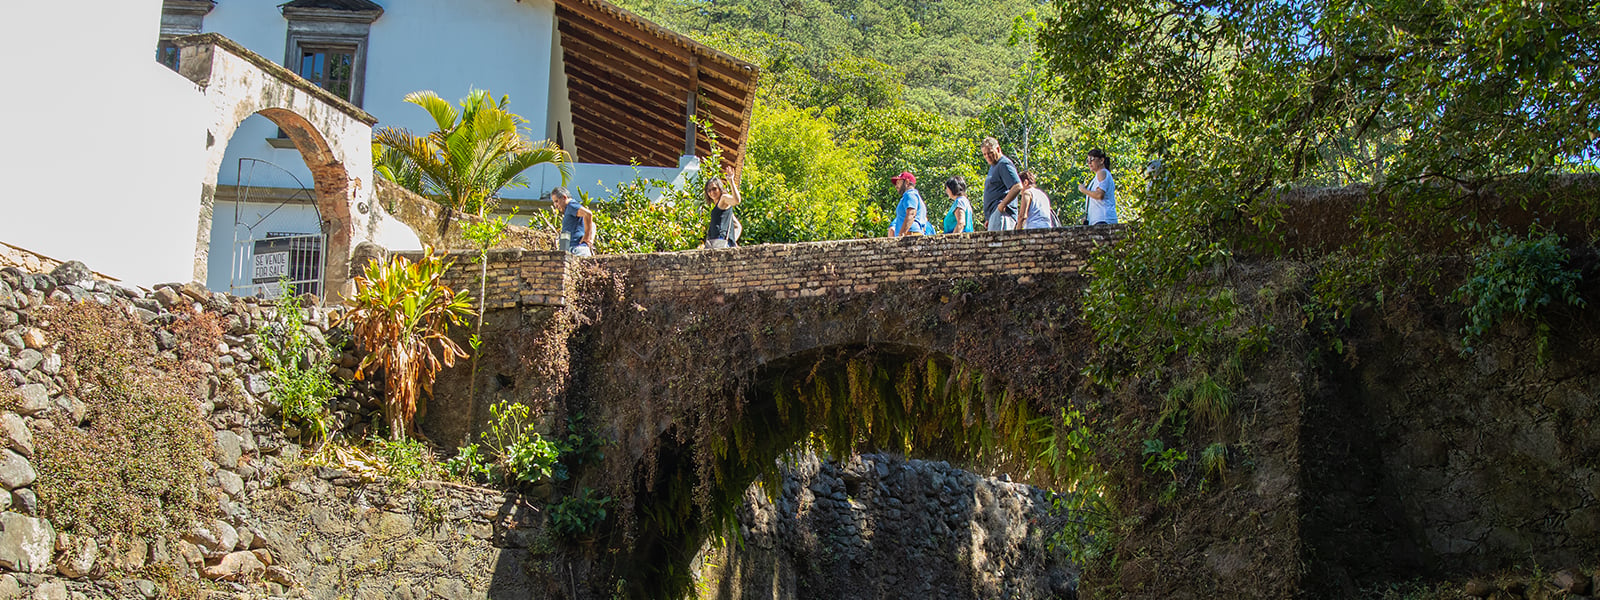 discover san sebastian del oeste in this interesting day trip with vallarta adventures